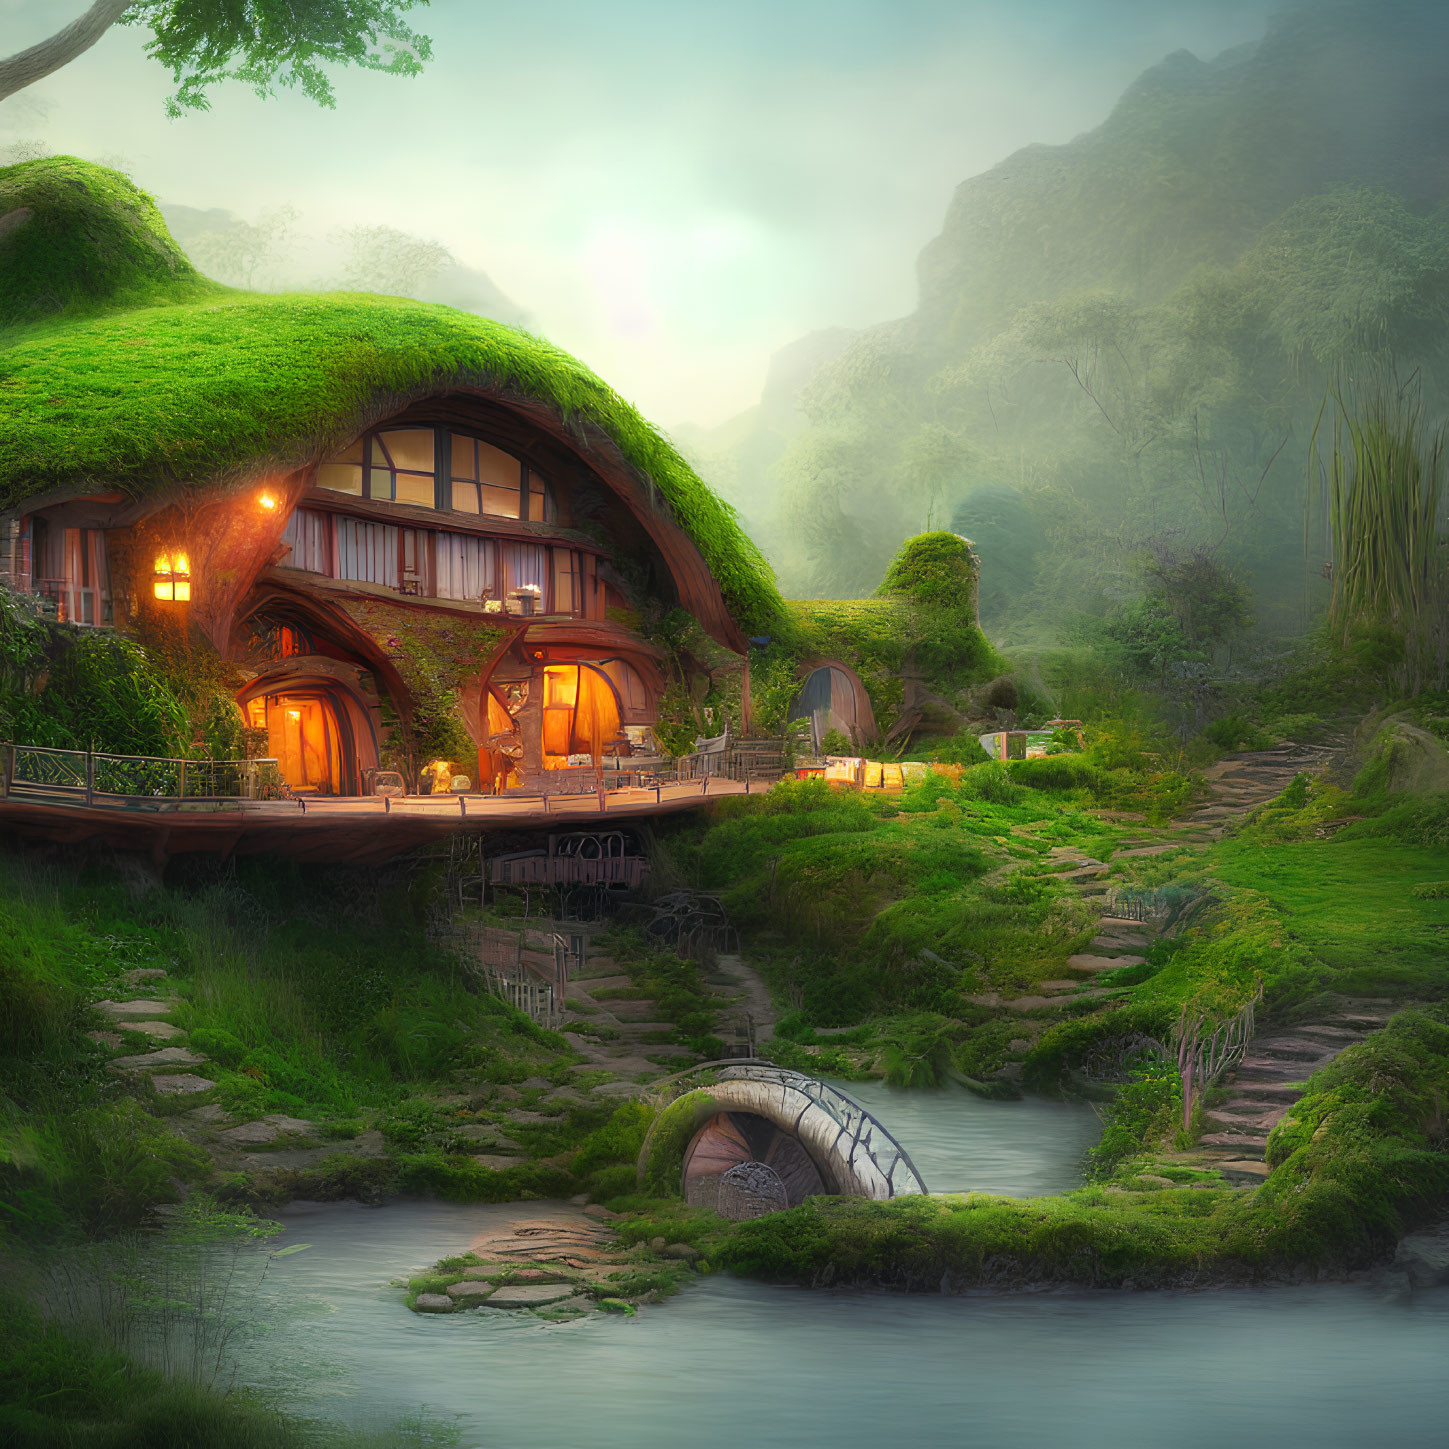 Charming moss-covered cottage by serene stream